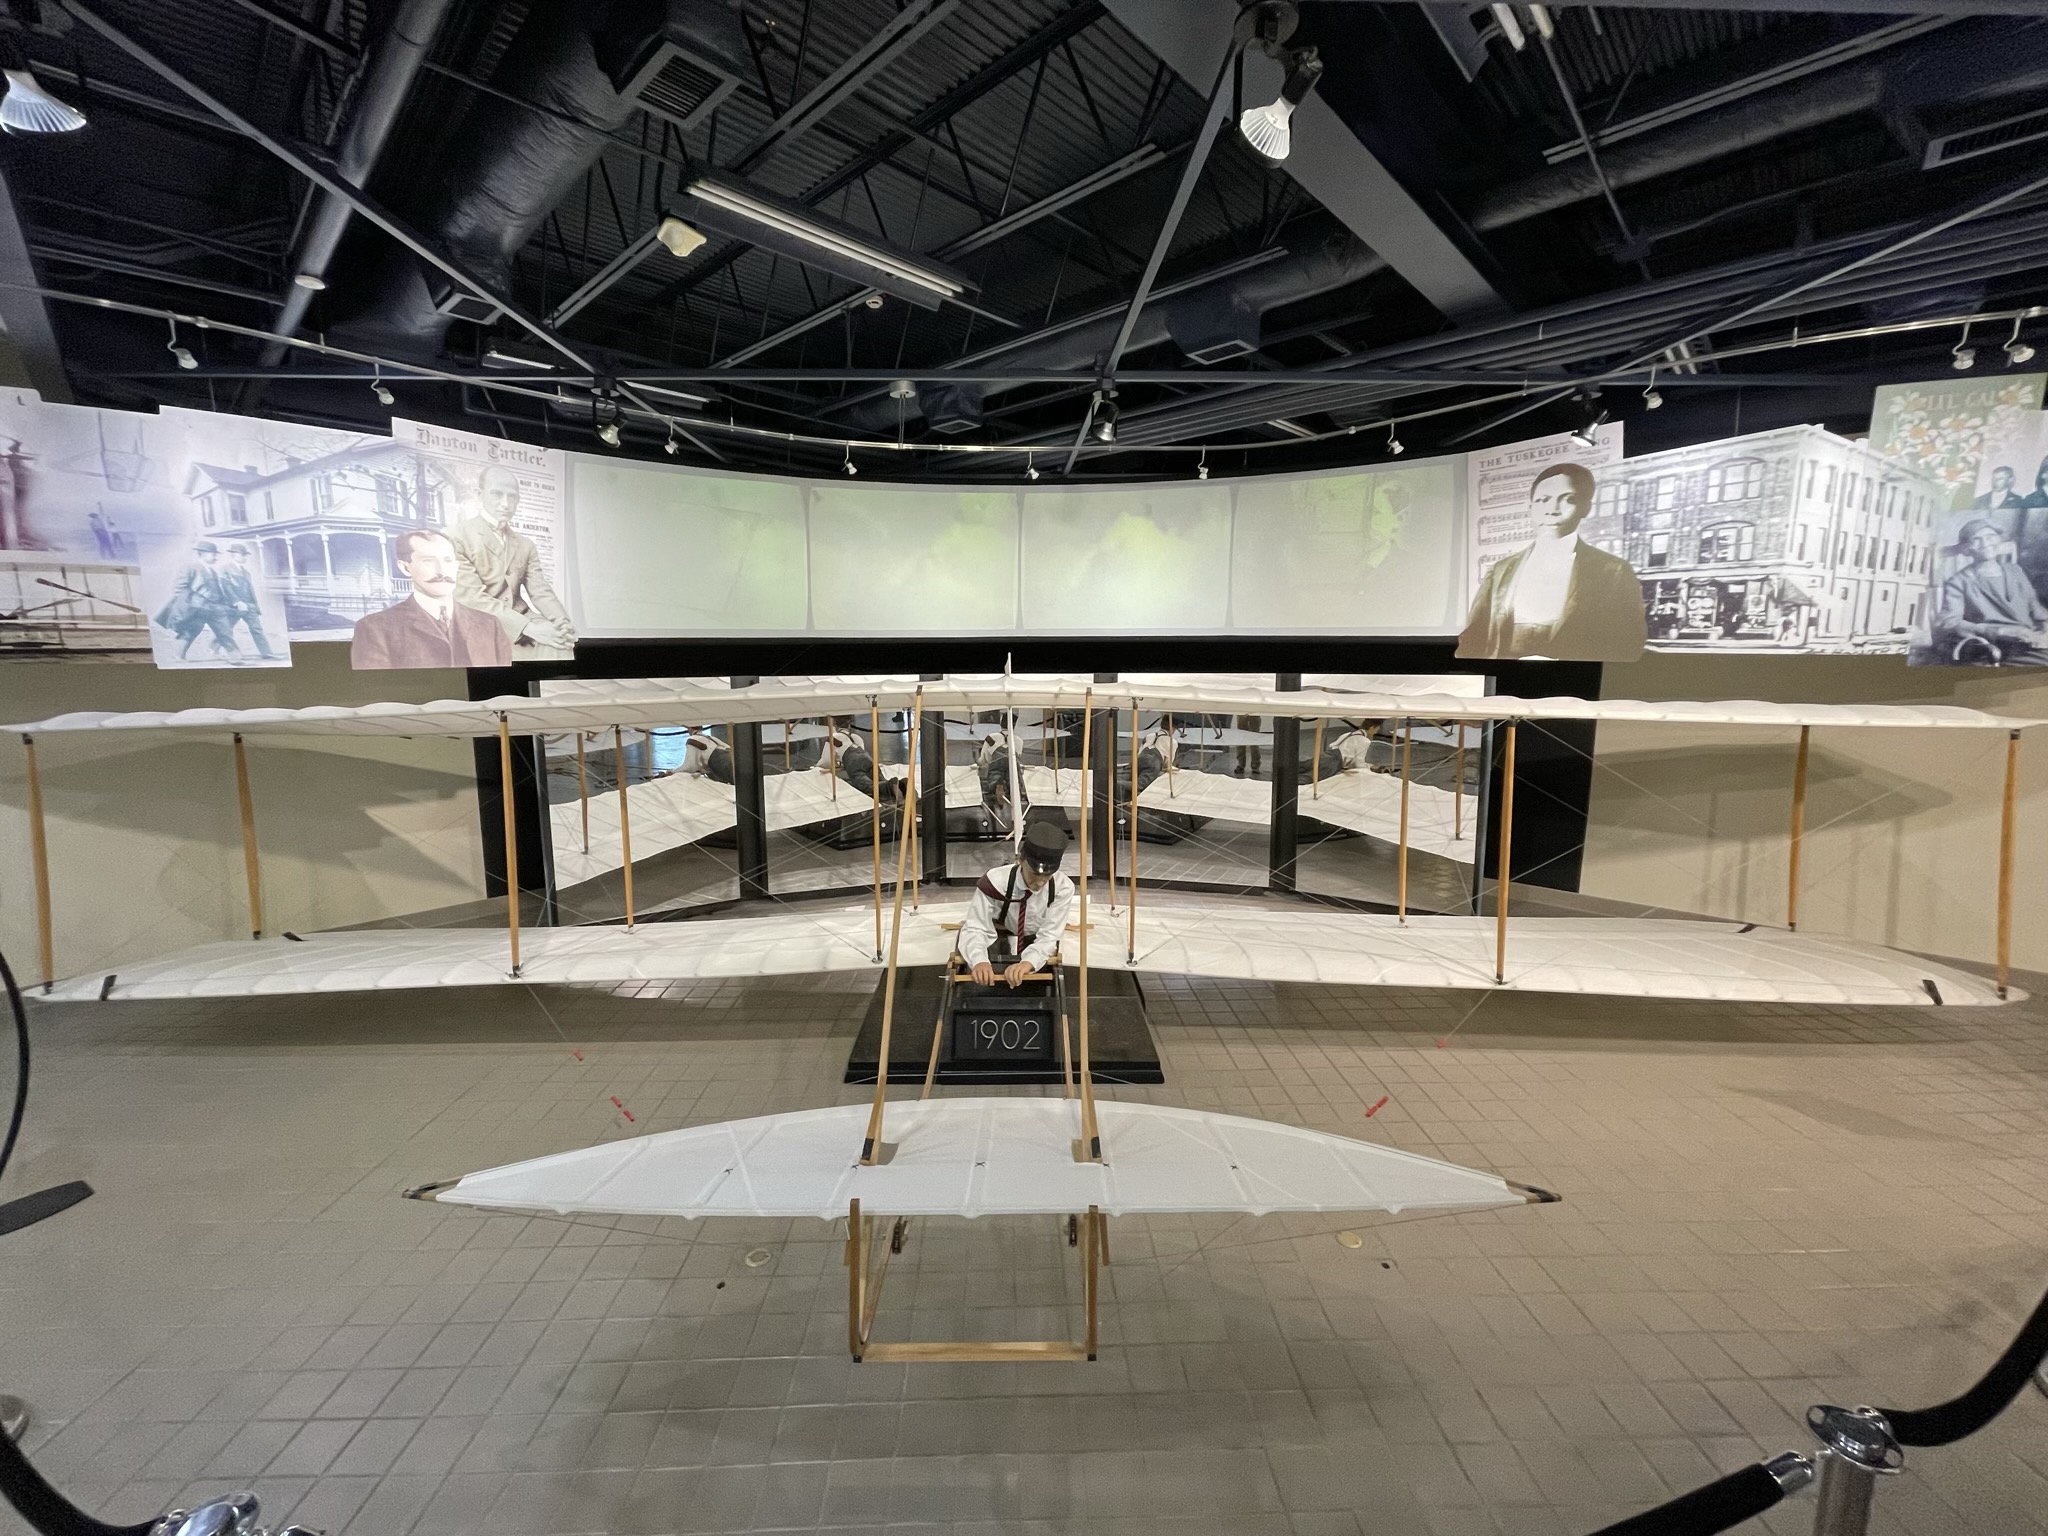 A photo of a scale reproduction of the 1902 Wright brothers glider inside the museum